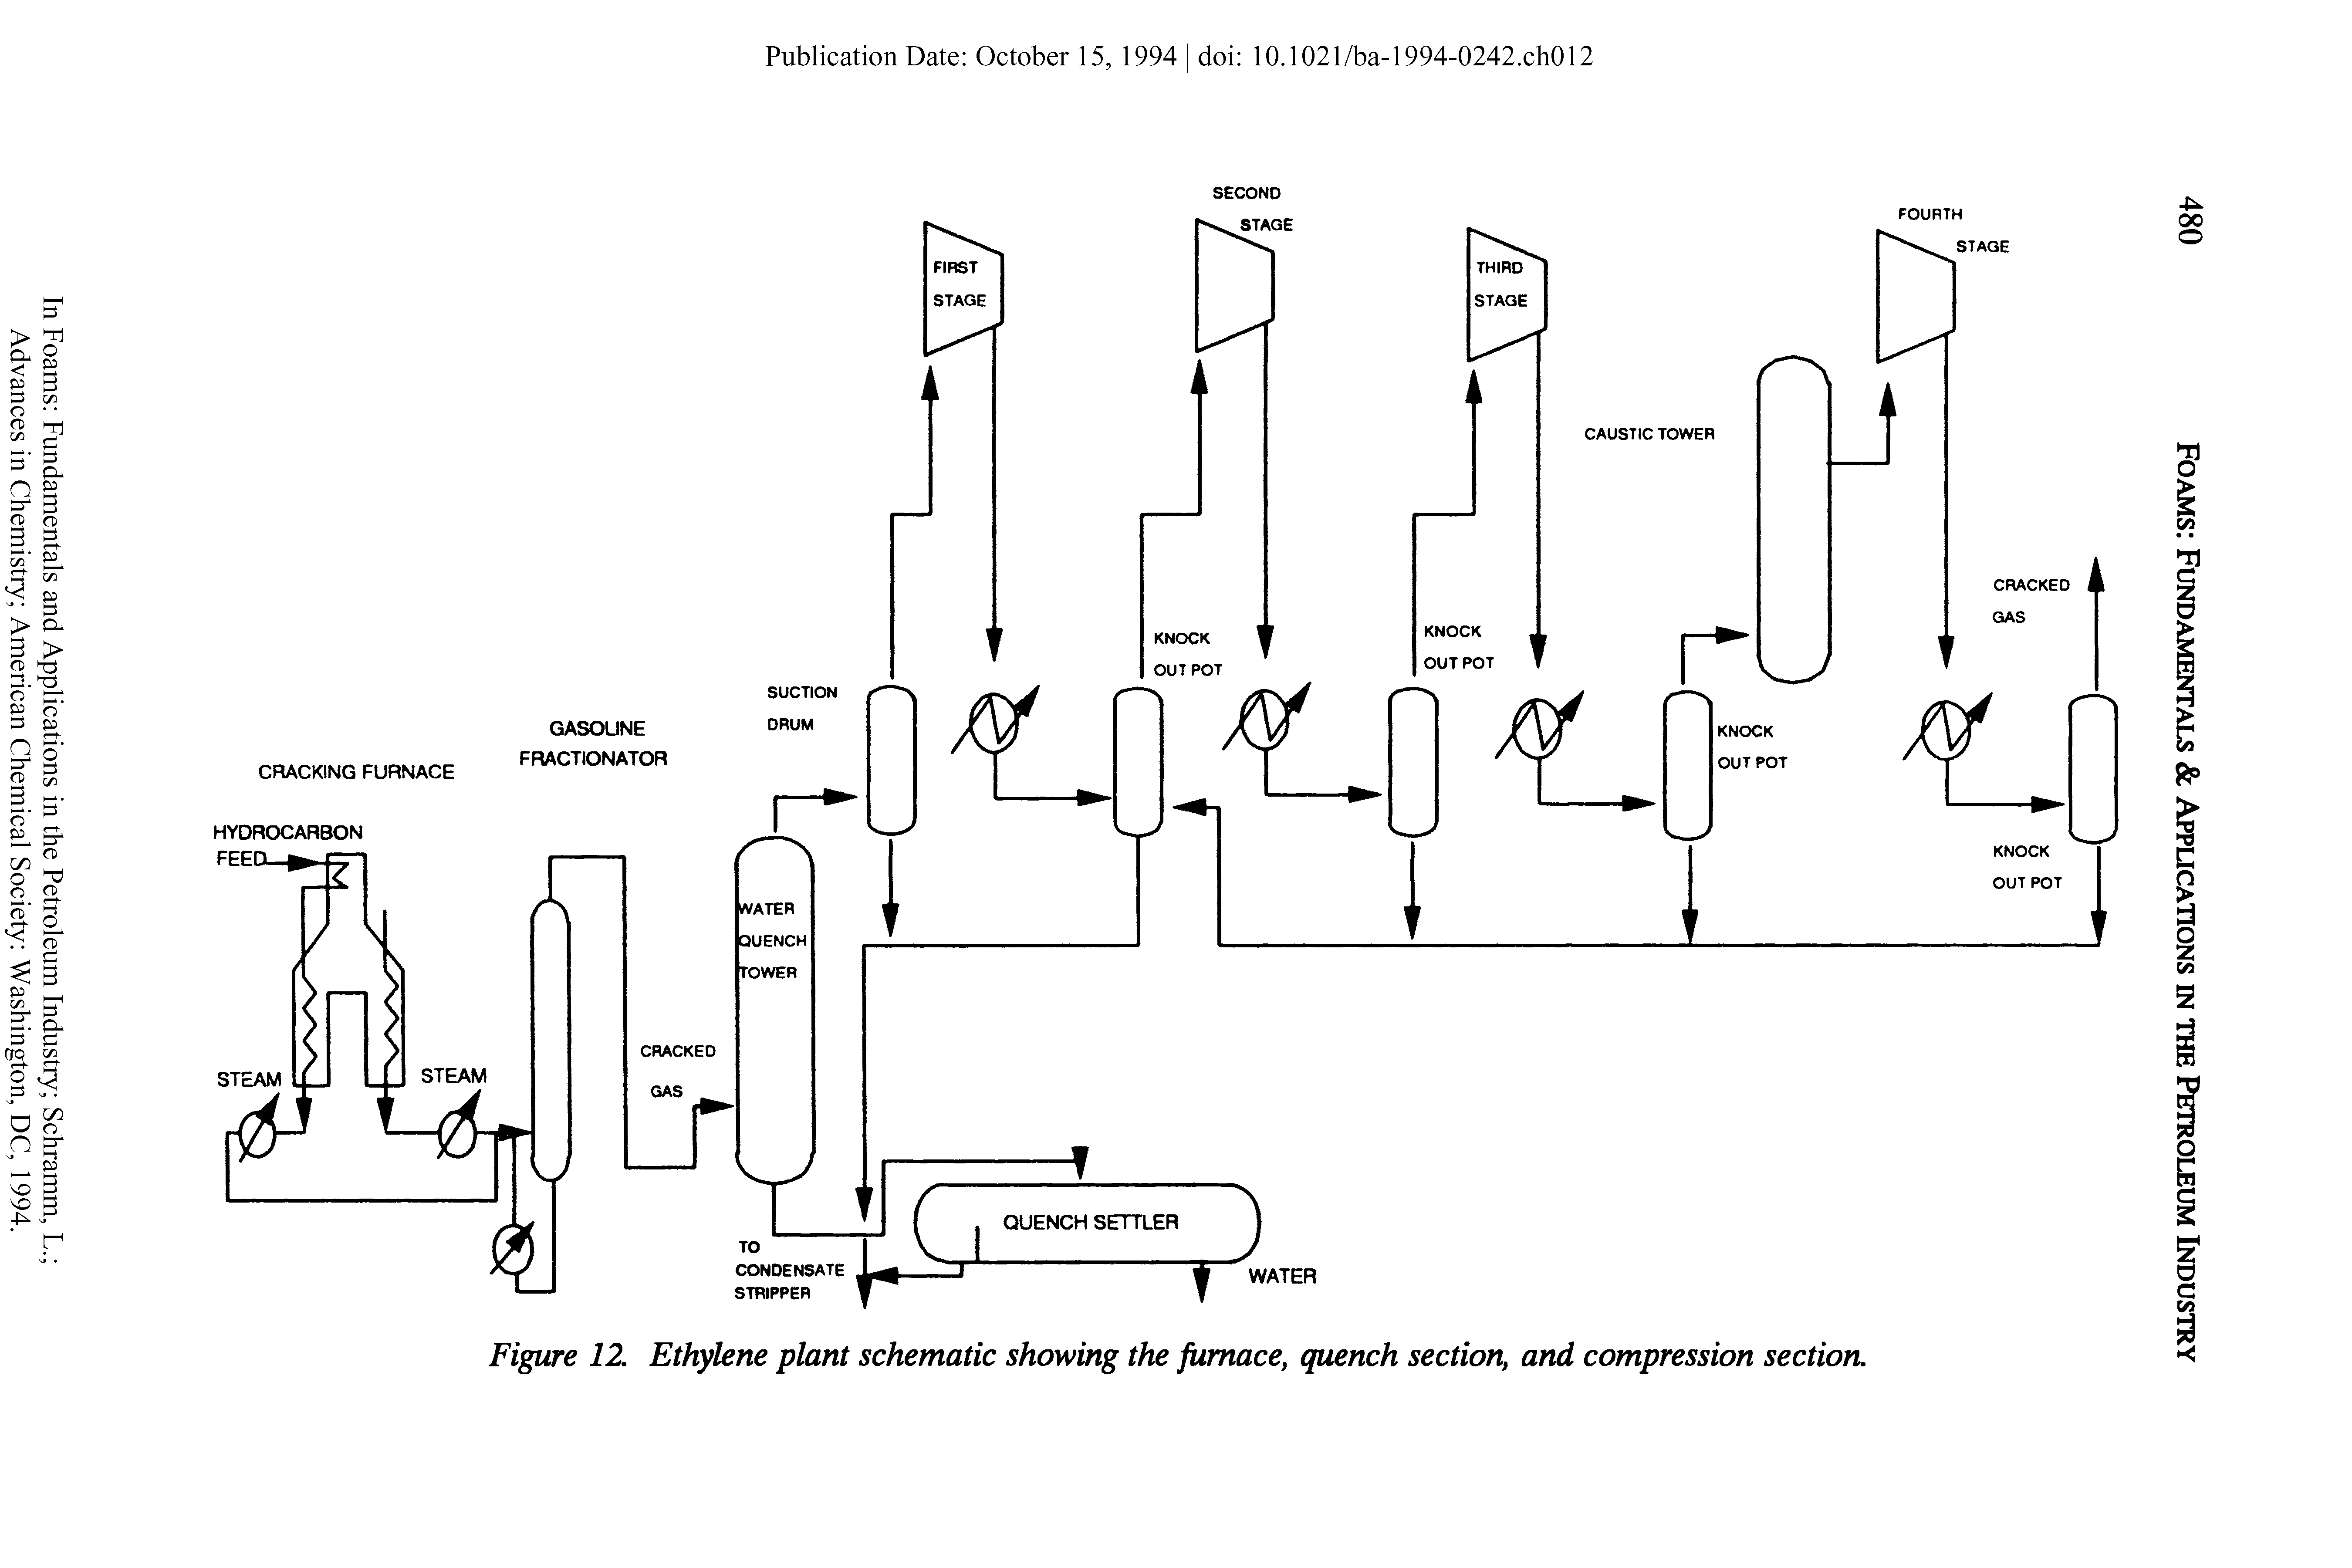 Figure 12. Ethylene plant schematic showing the furnace, quench section and compression section.